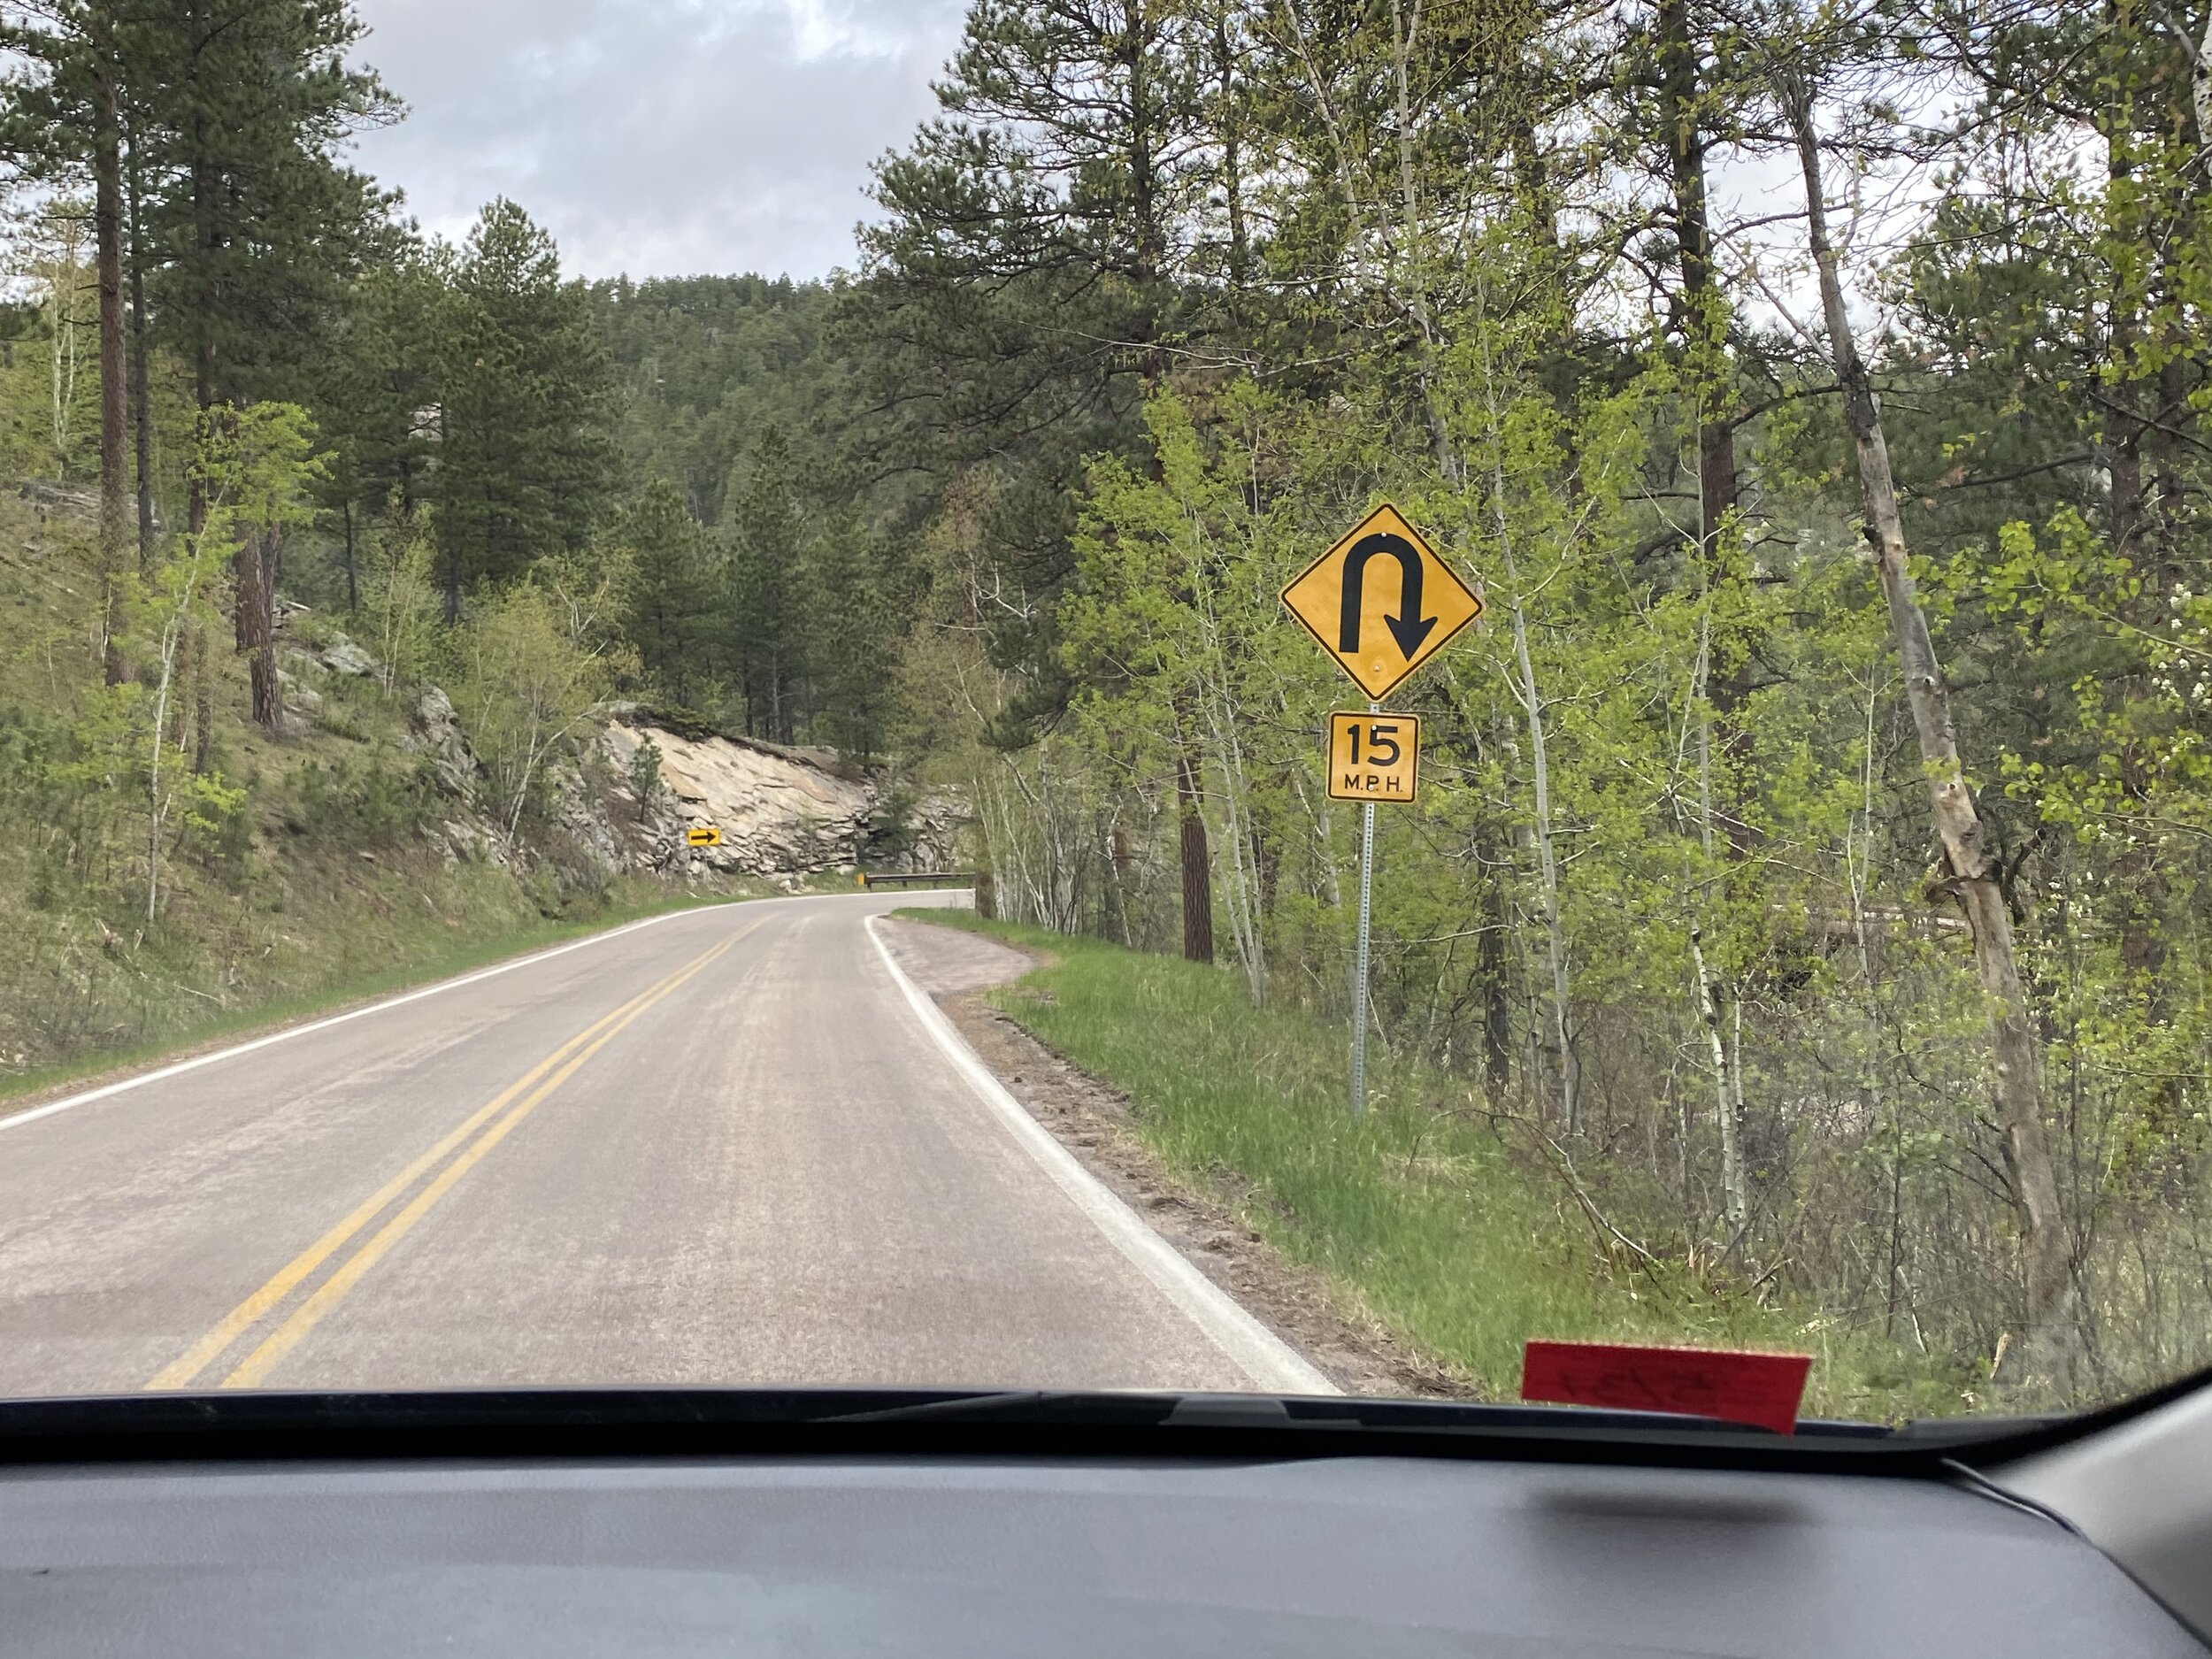 Sharp switchback turns require much lower speeds but more time to enjoy the views!  Photo by Karen Boudreaux, May 26, 2021